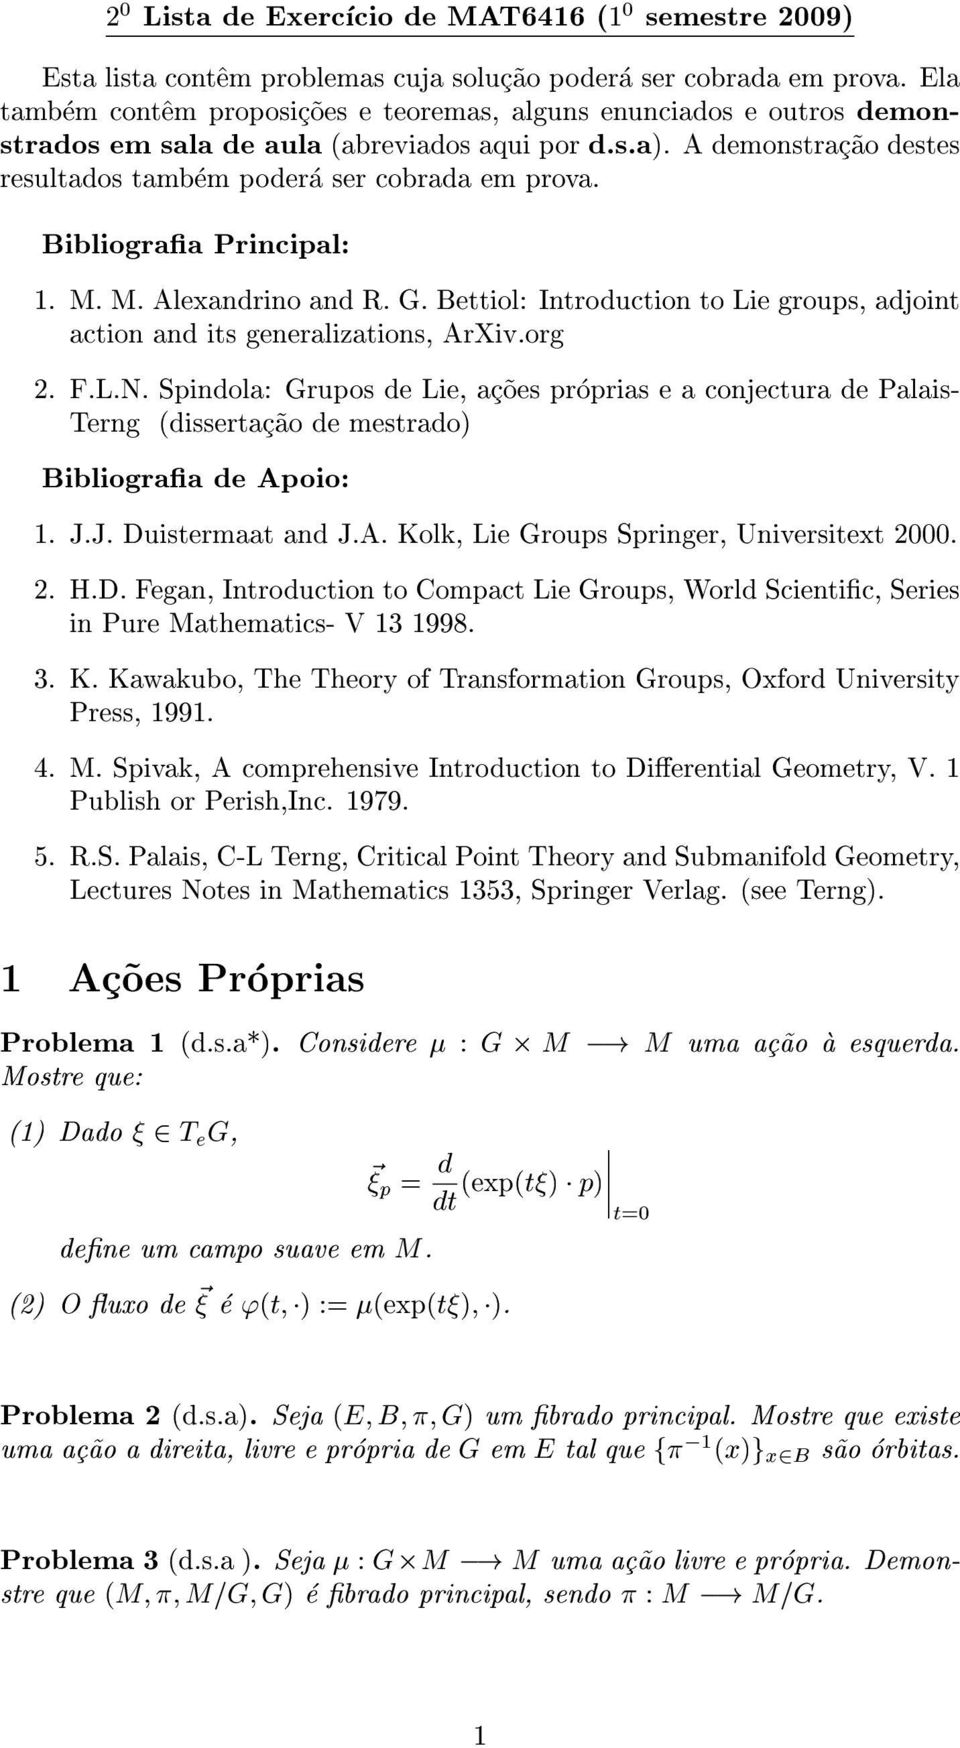 Bibliograa Principal: 1. M. M. Alexandrino and R. G. Bettiol: Introduction to Lie groups, adjoint action and its generalizations, ArXiv.org 2. F.L.N.